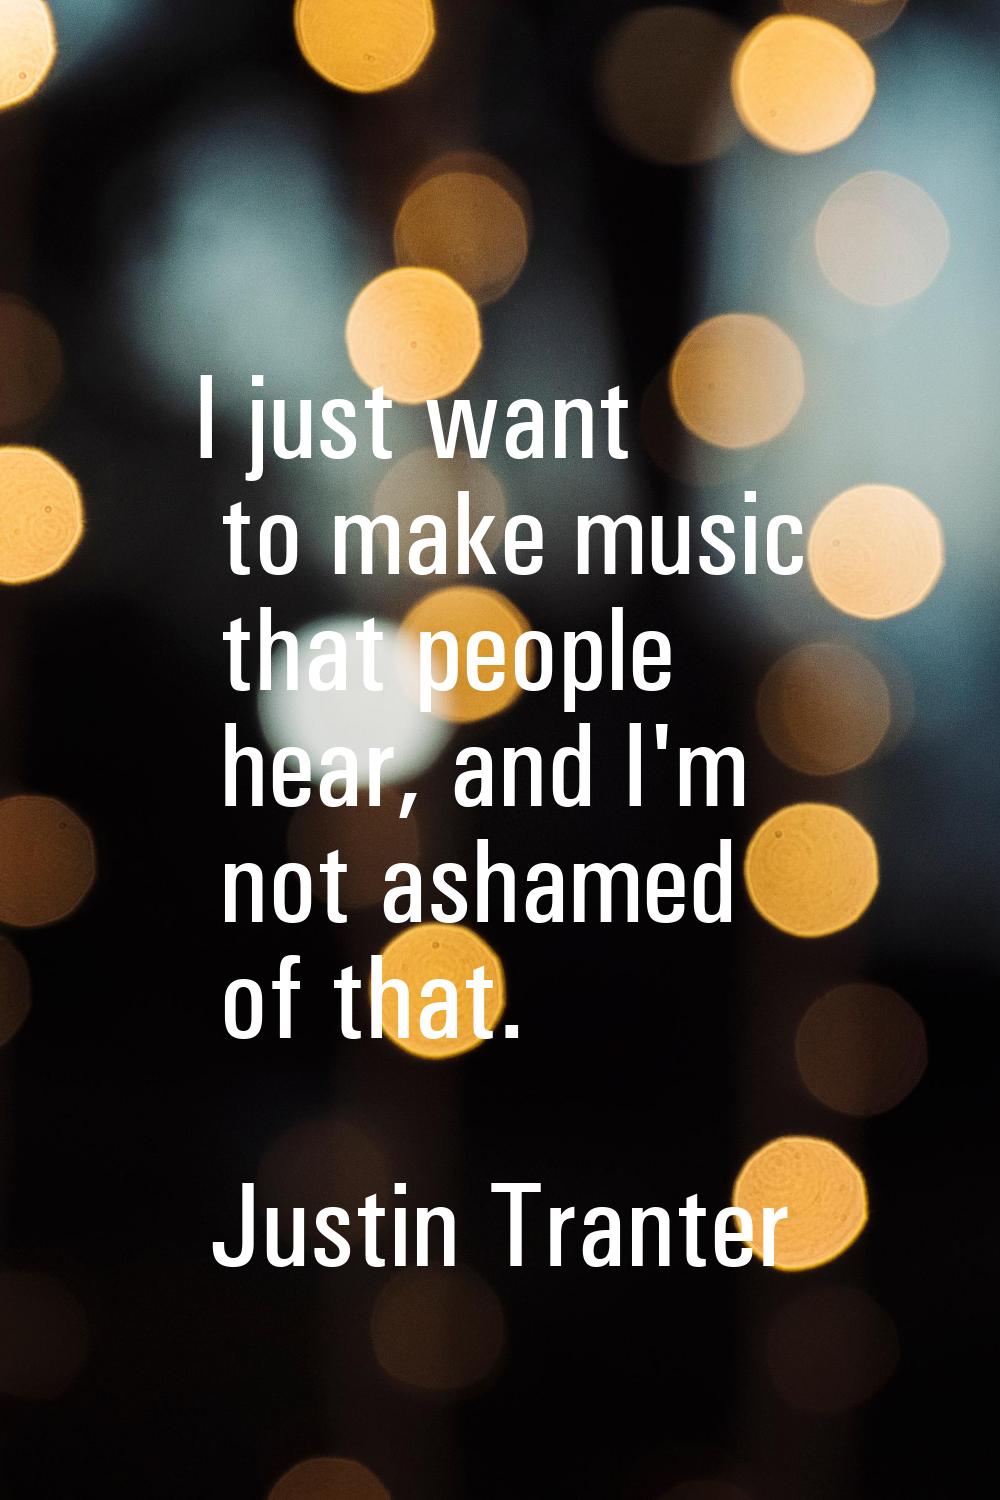 I just want to make music that people hear, and I'm not ashamed of that.